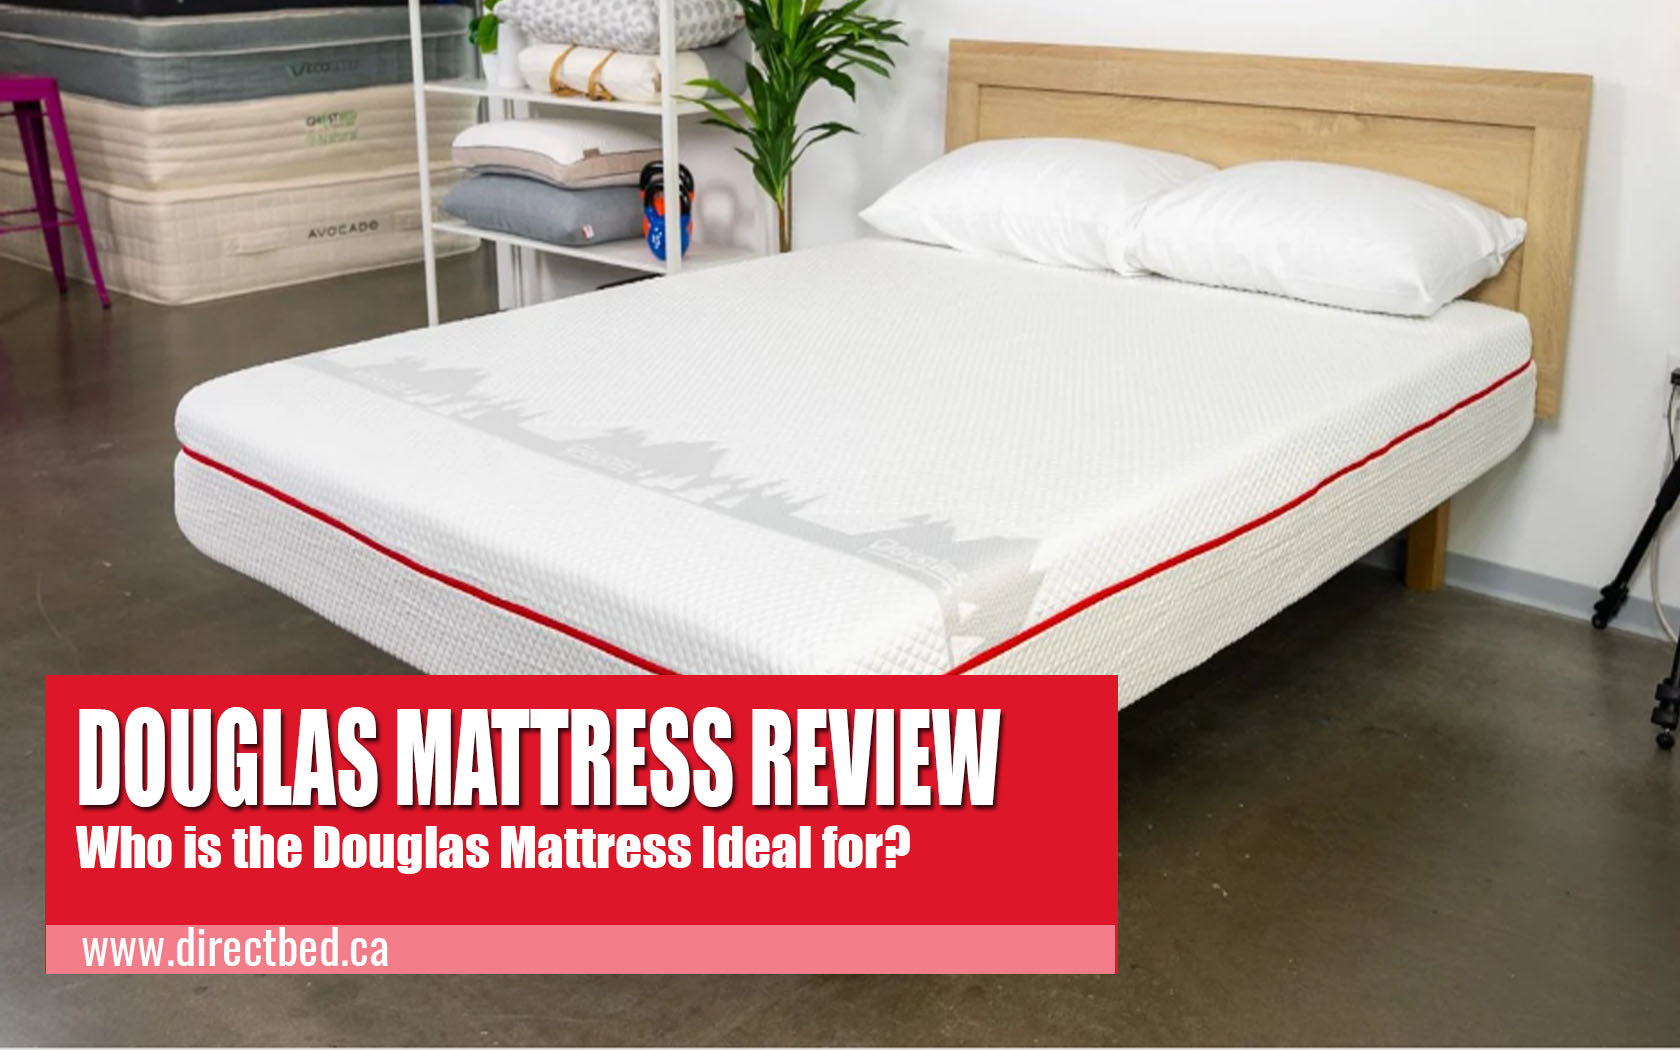 Who is the Douglas Mattress ideal for?